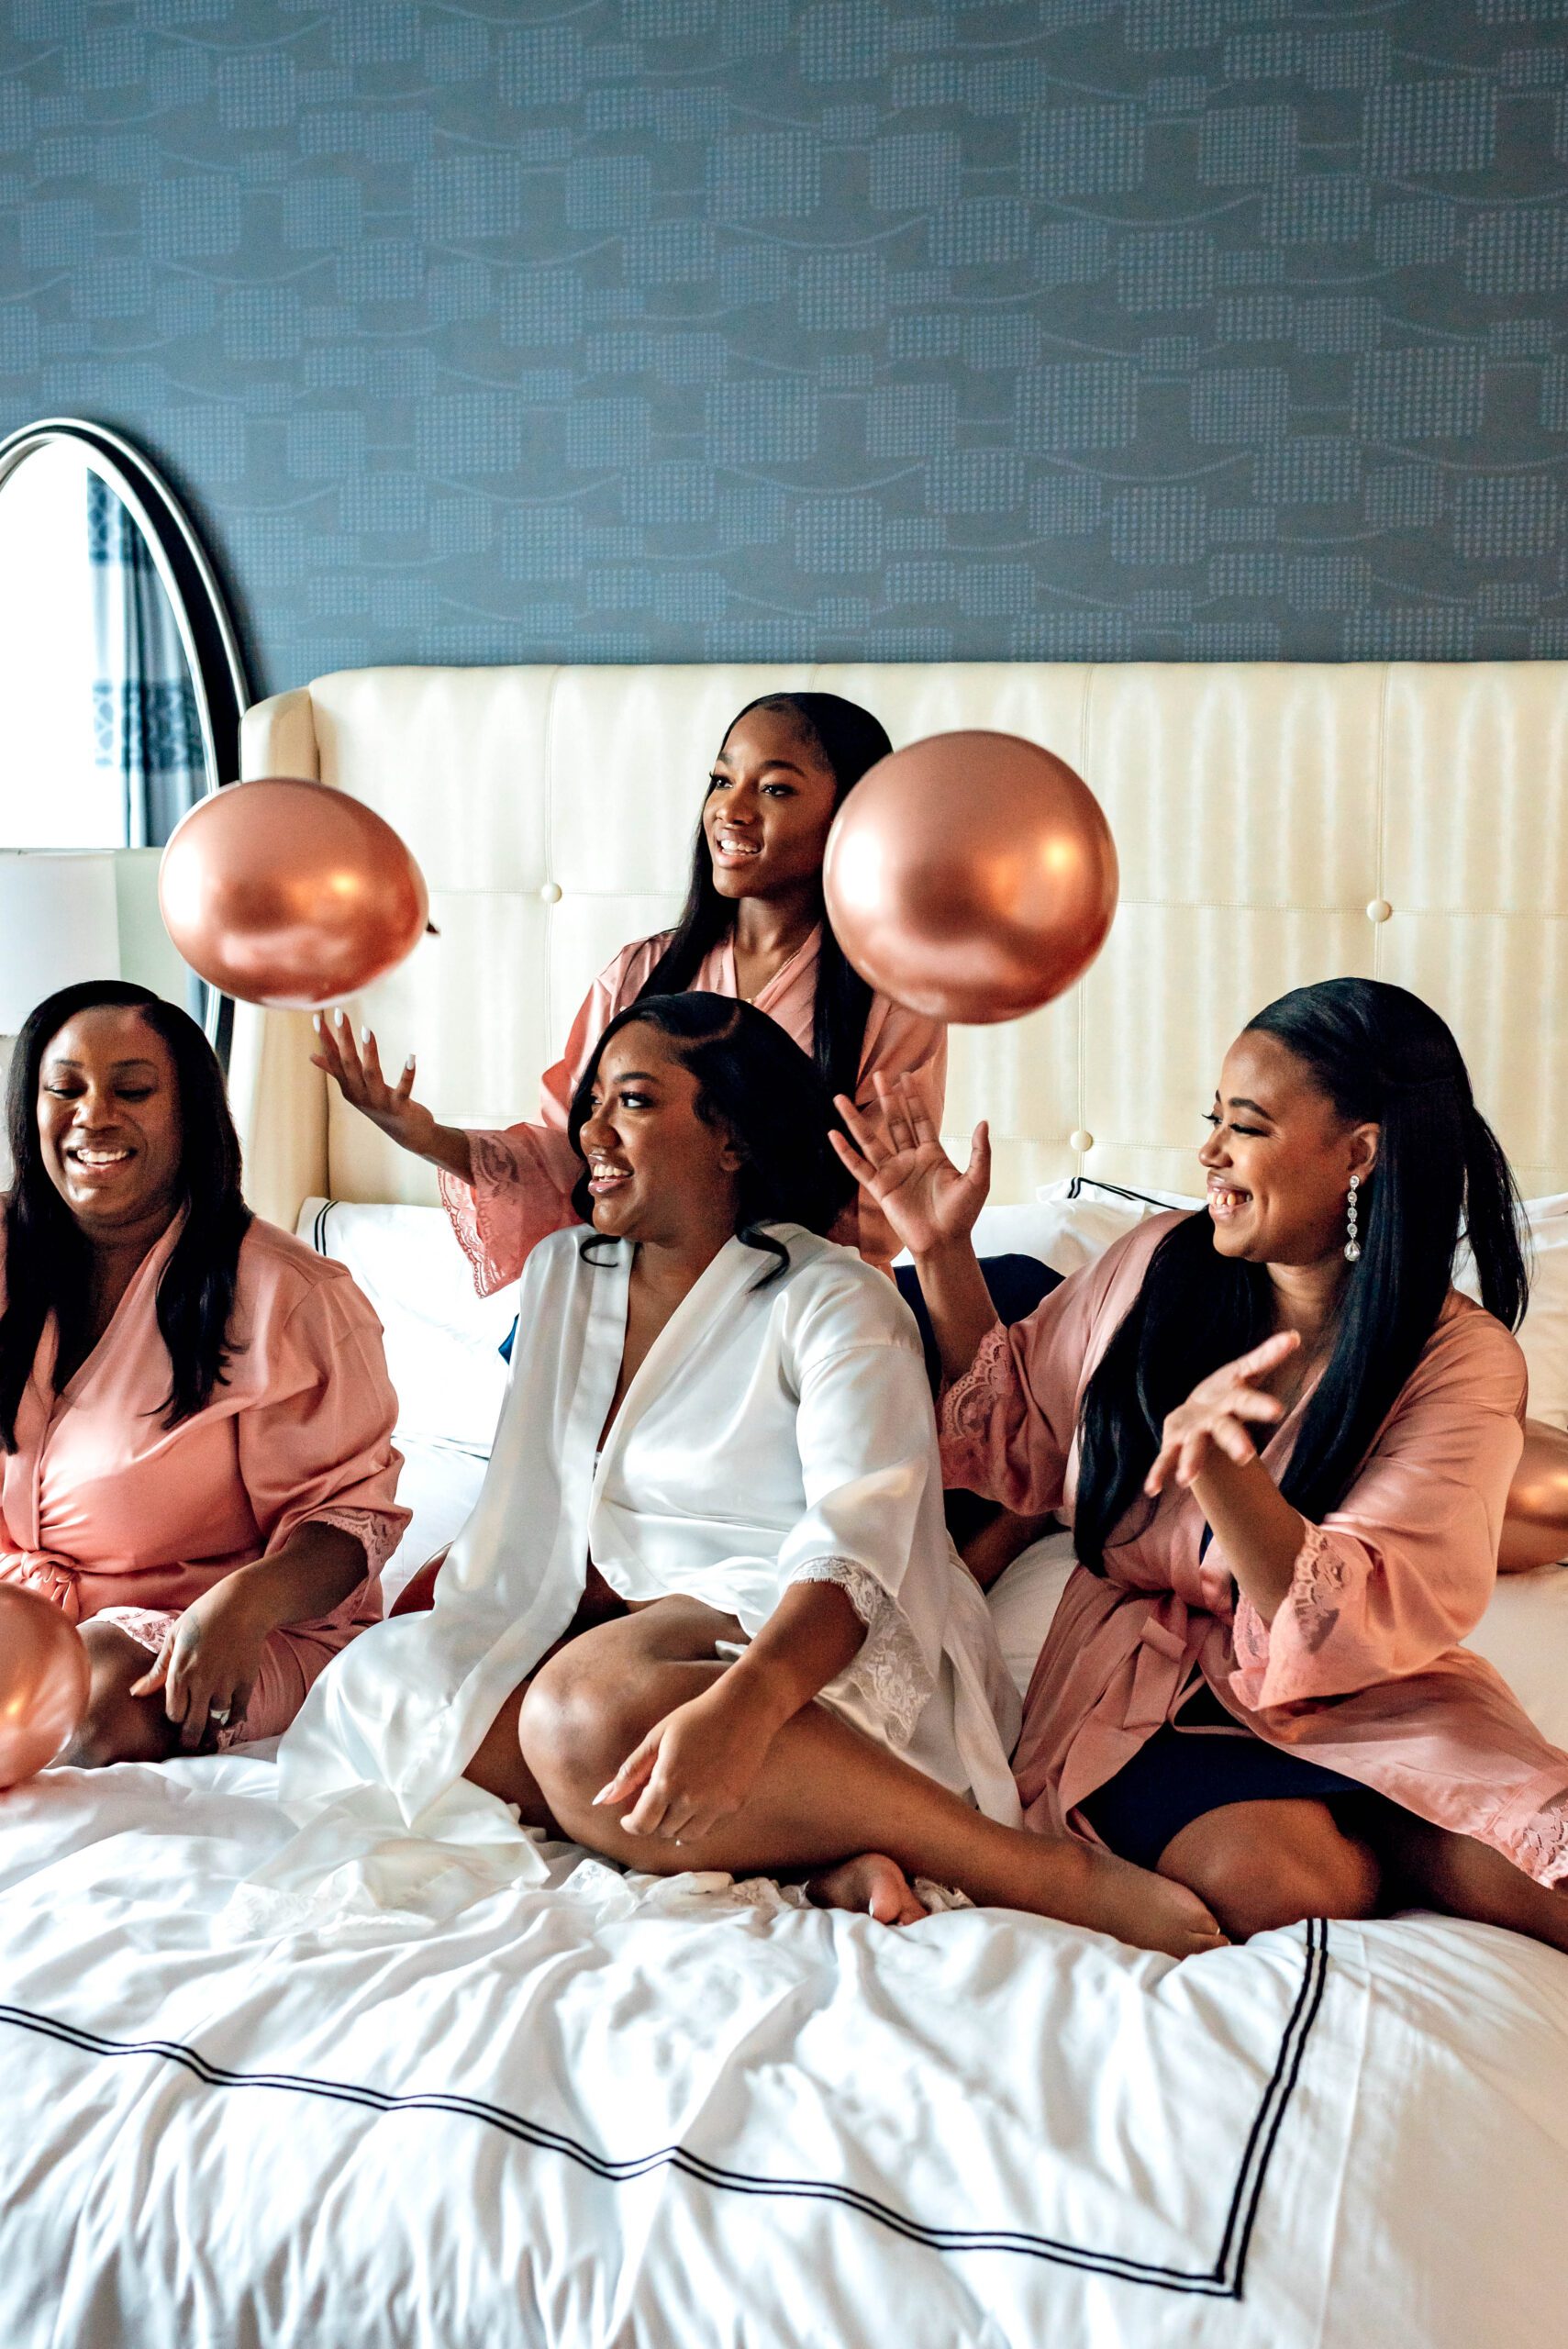 Bride and bridesmaids throwing balloons in hotel room in matching robes before getting ready for the wedding